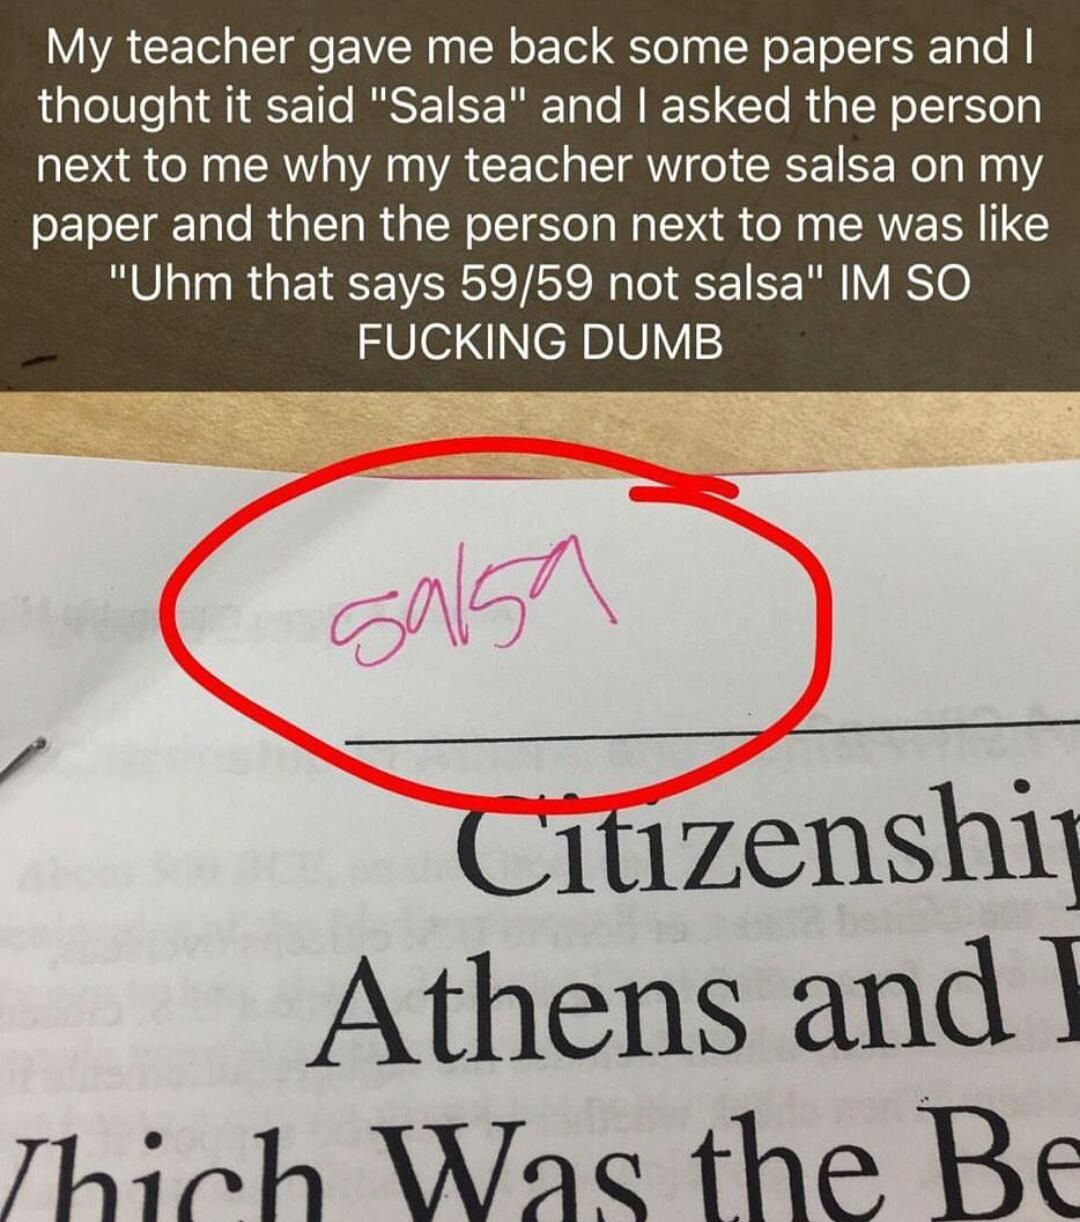 Salsa? What kind of grade is salsa?